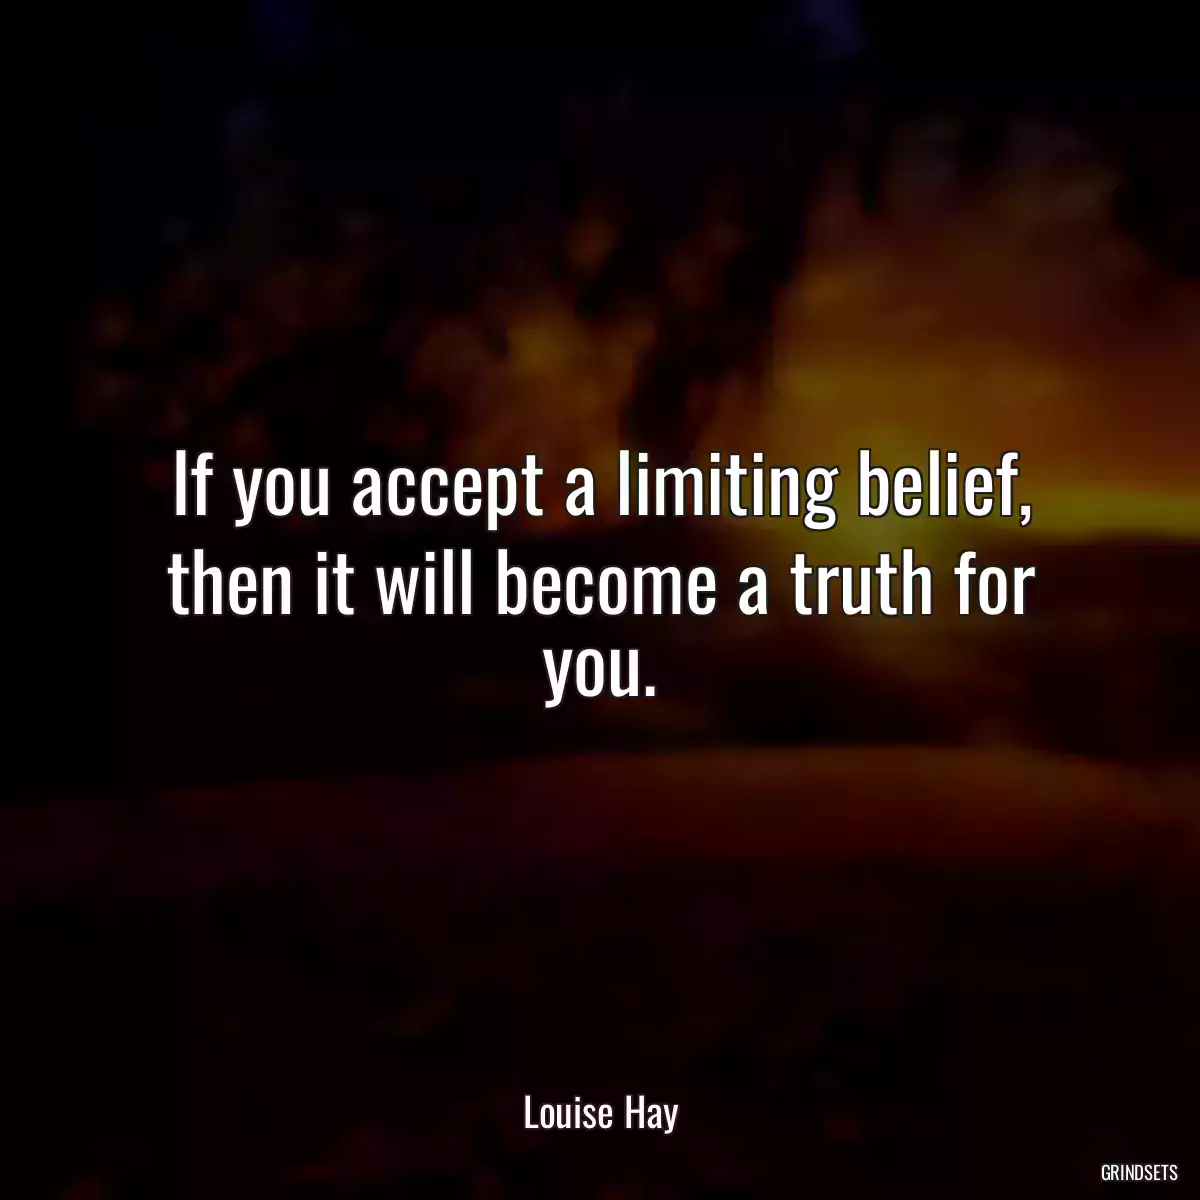 If you accept a limiting belief, then it will become a truth for you.